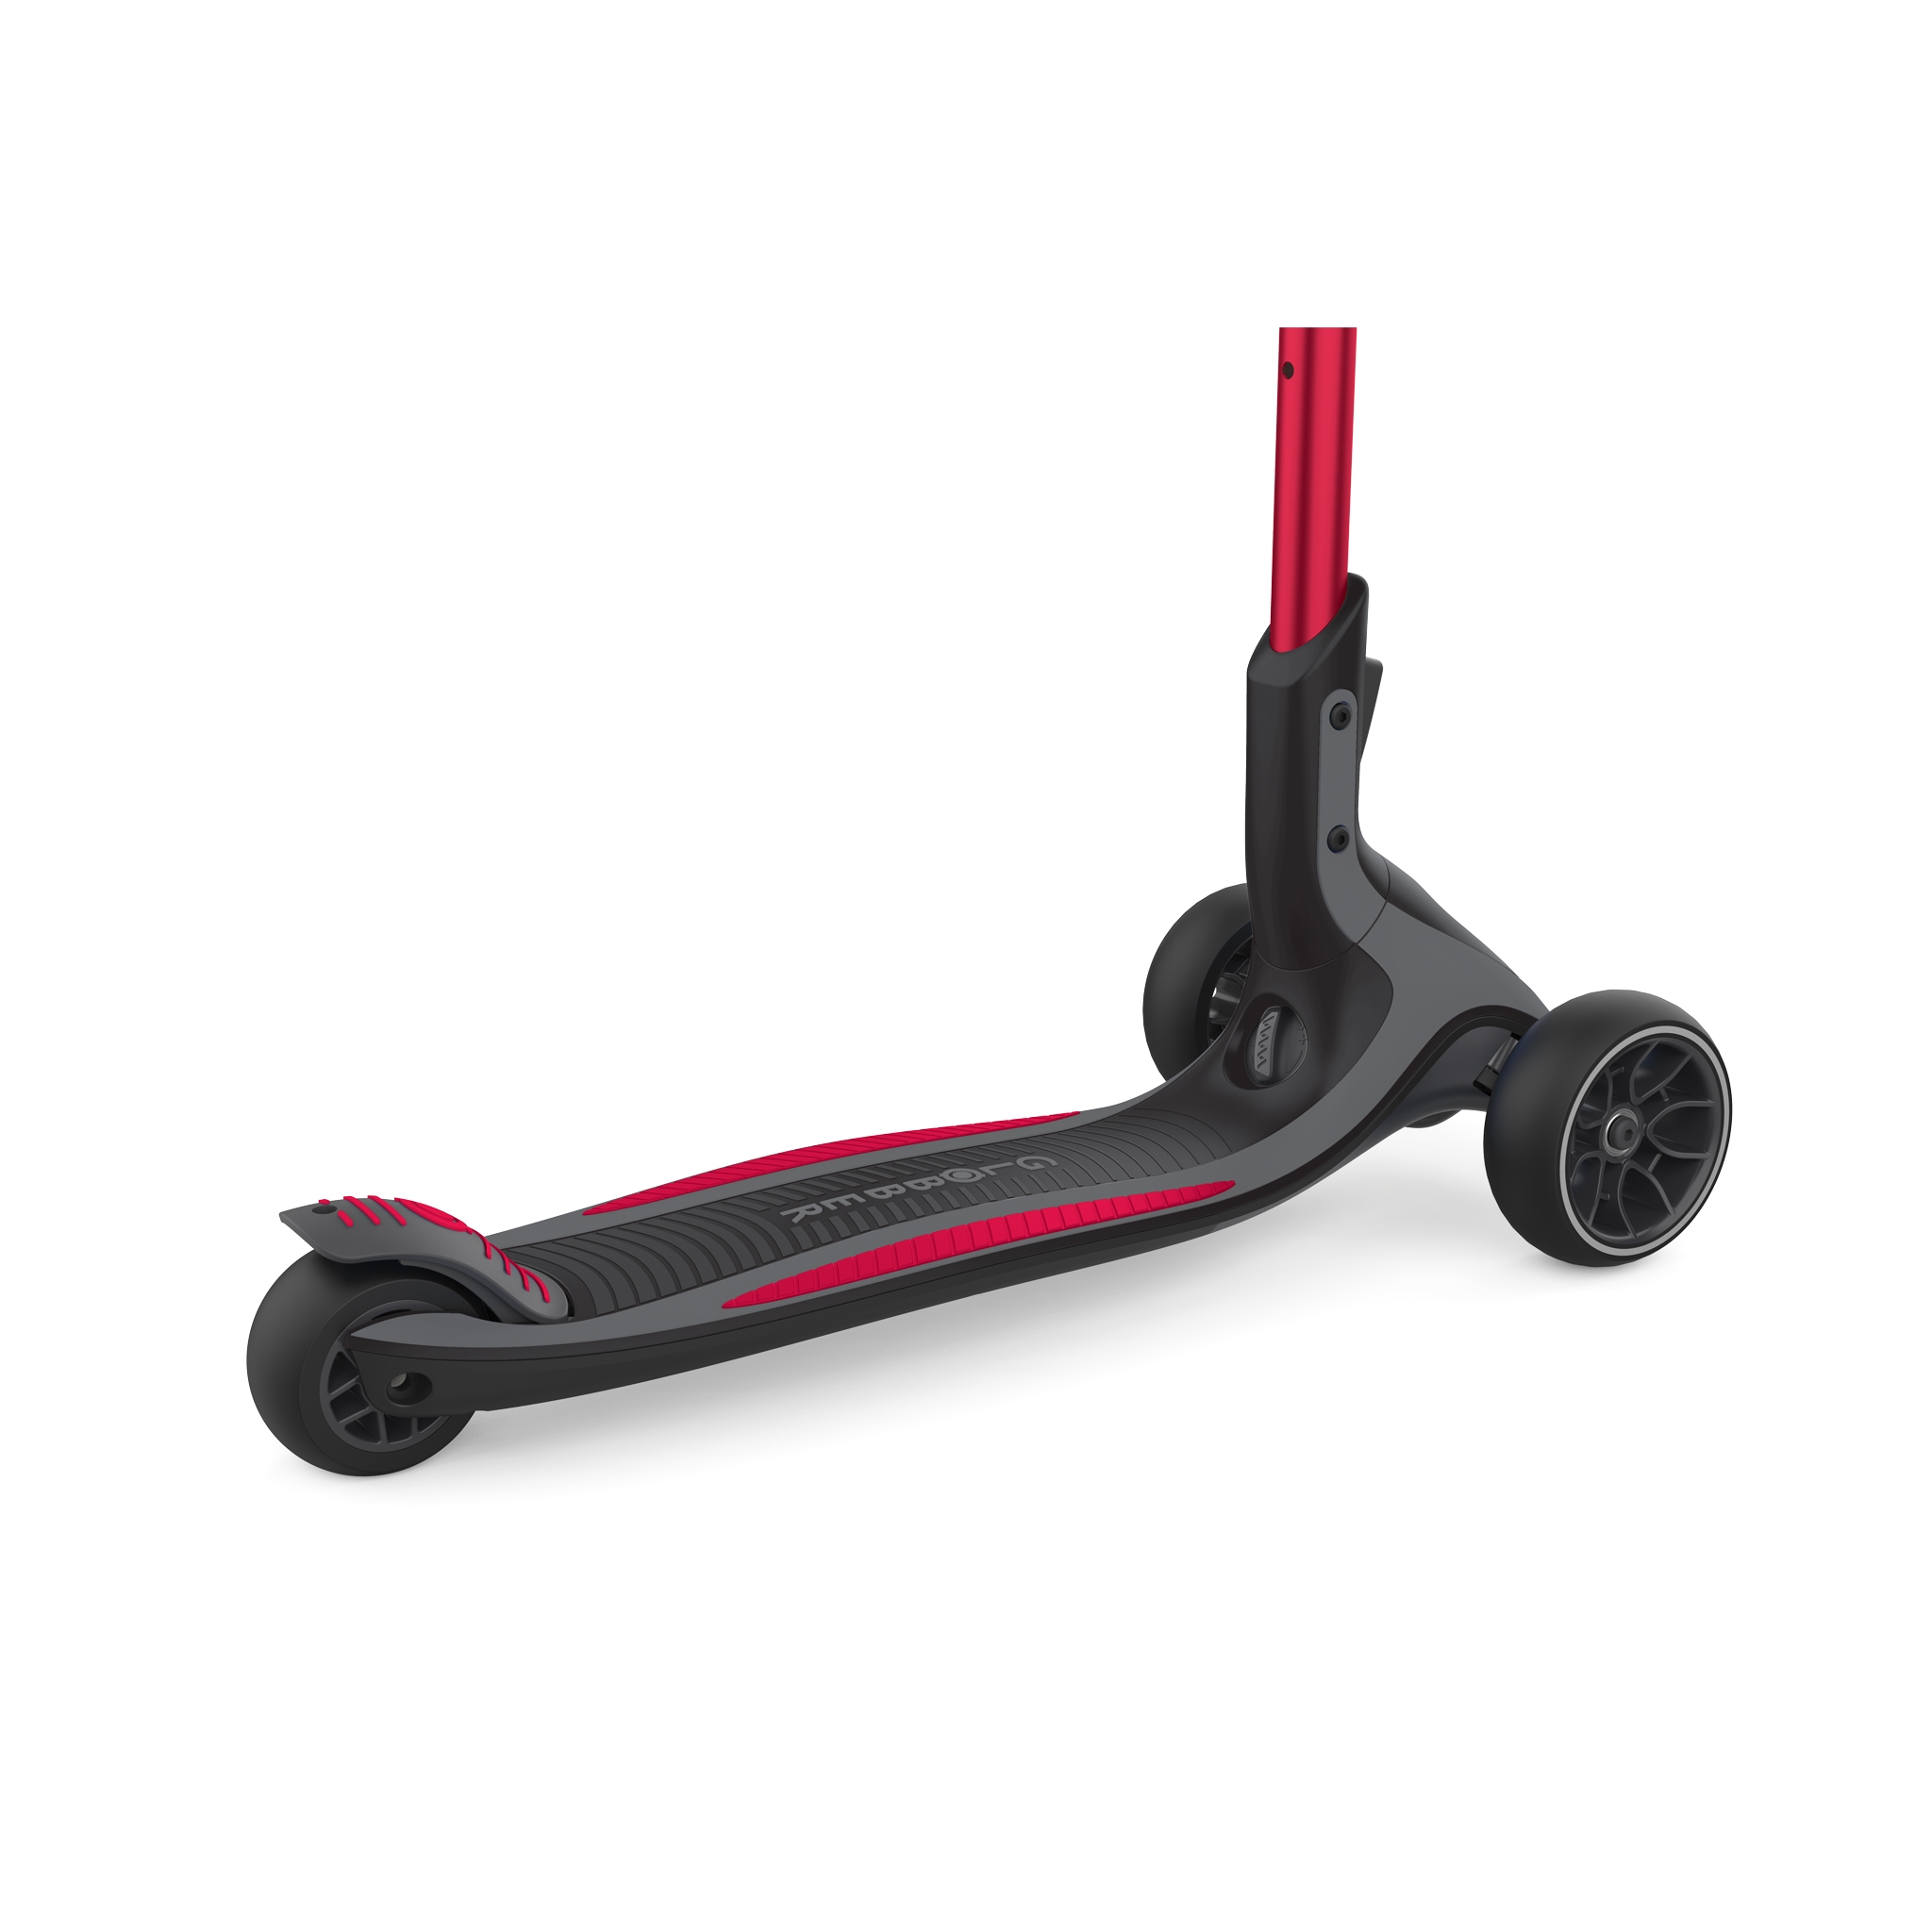 3 wheel foldable scooter for kids, teens and adults - Globber ULTIMUM 6